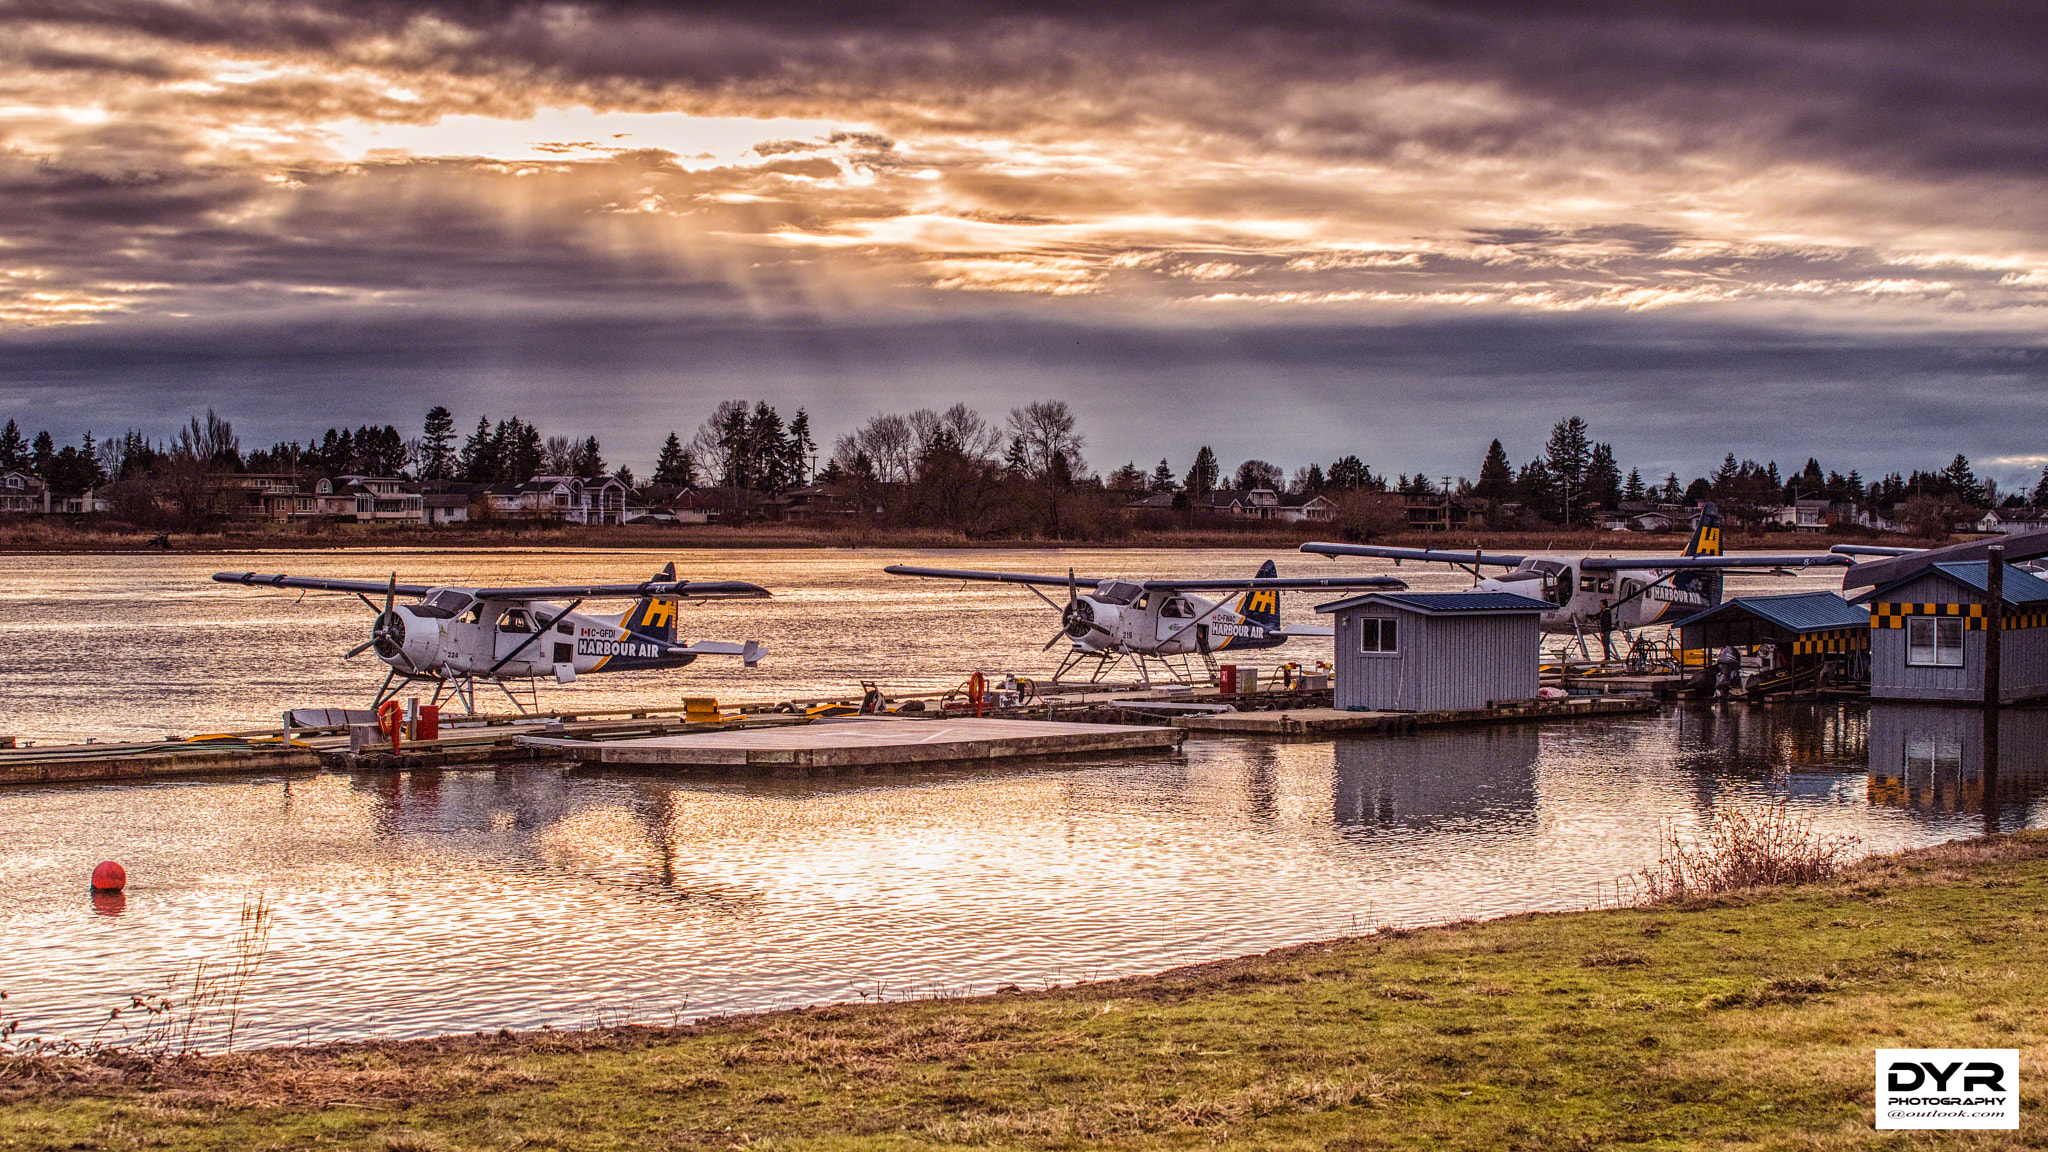 Pentax K-1 sample photo. Sunset at harbour air's yvr airport south terminal location. photography